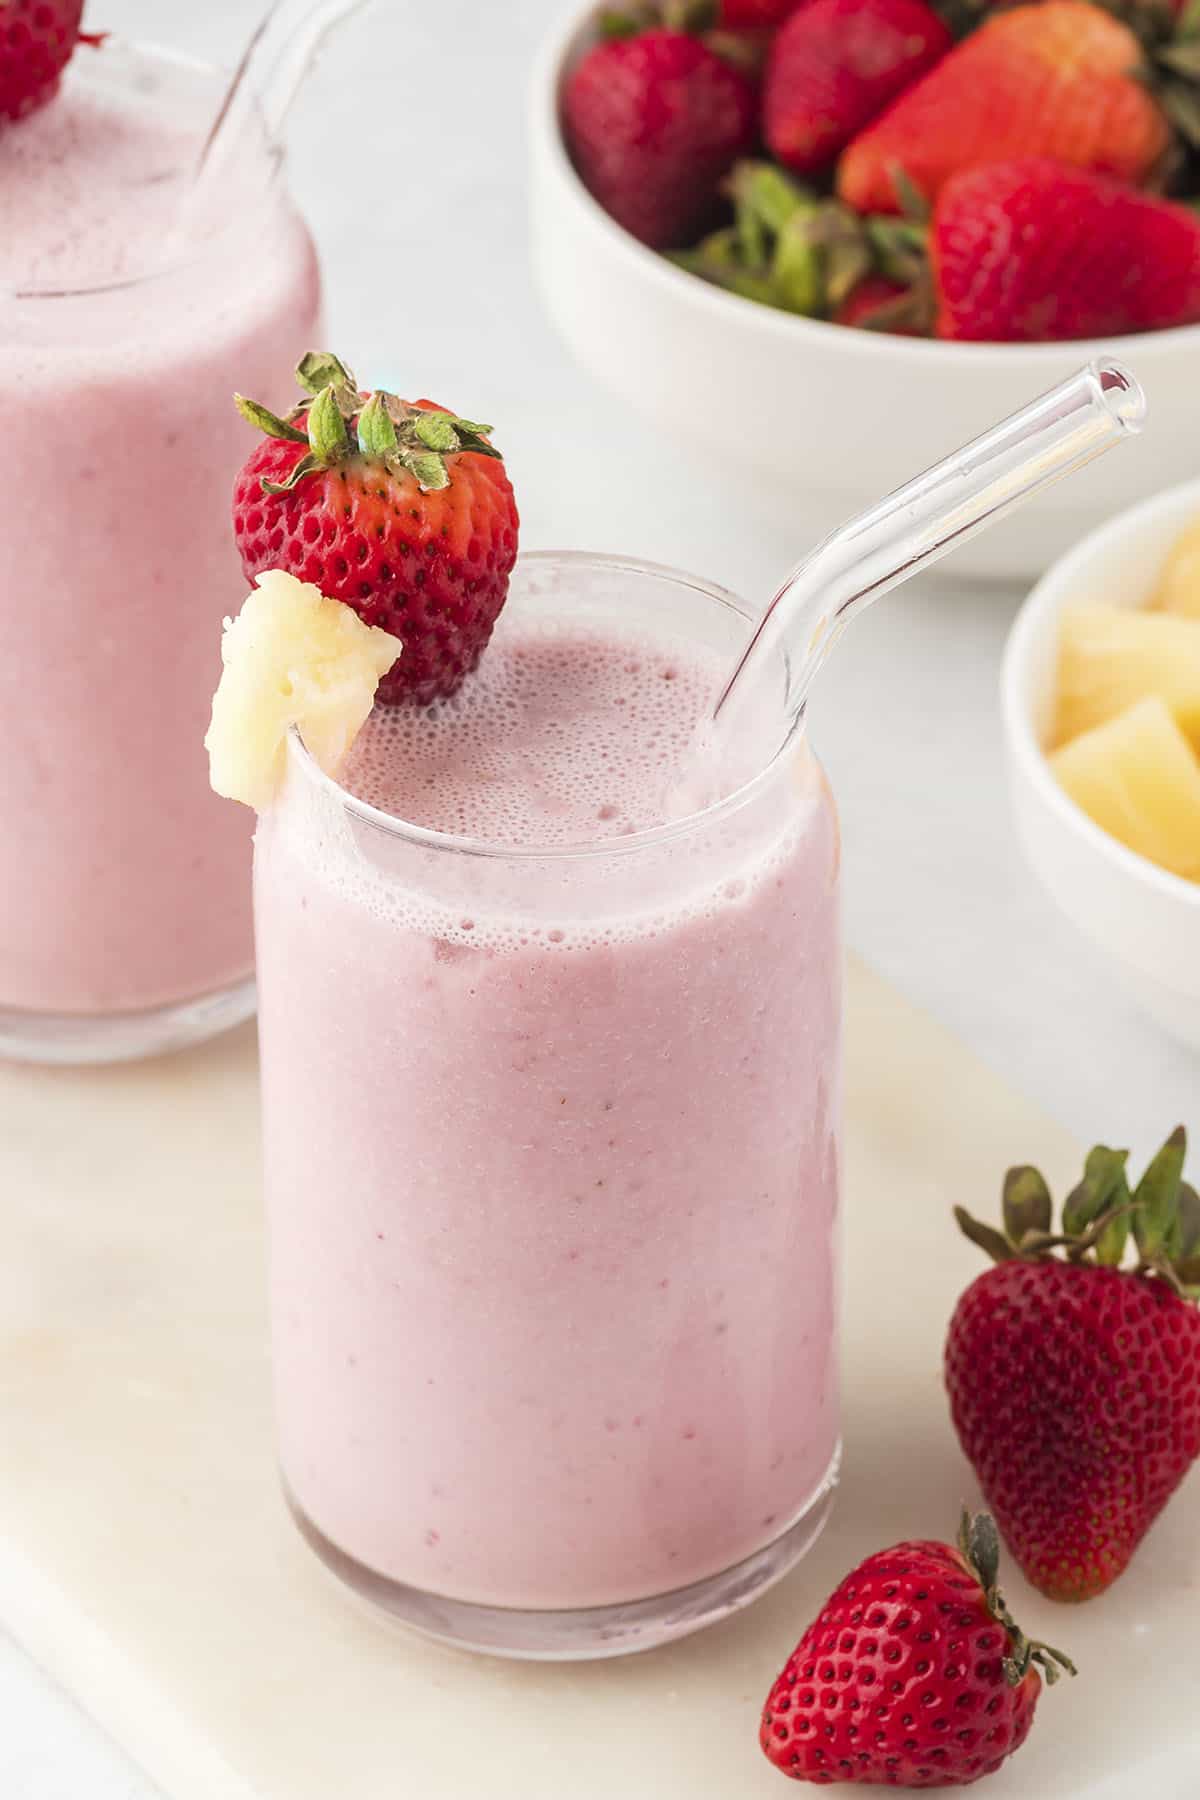 Strawberry pineapple smoothie in glass with glass straw.